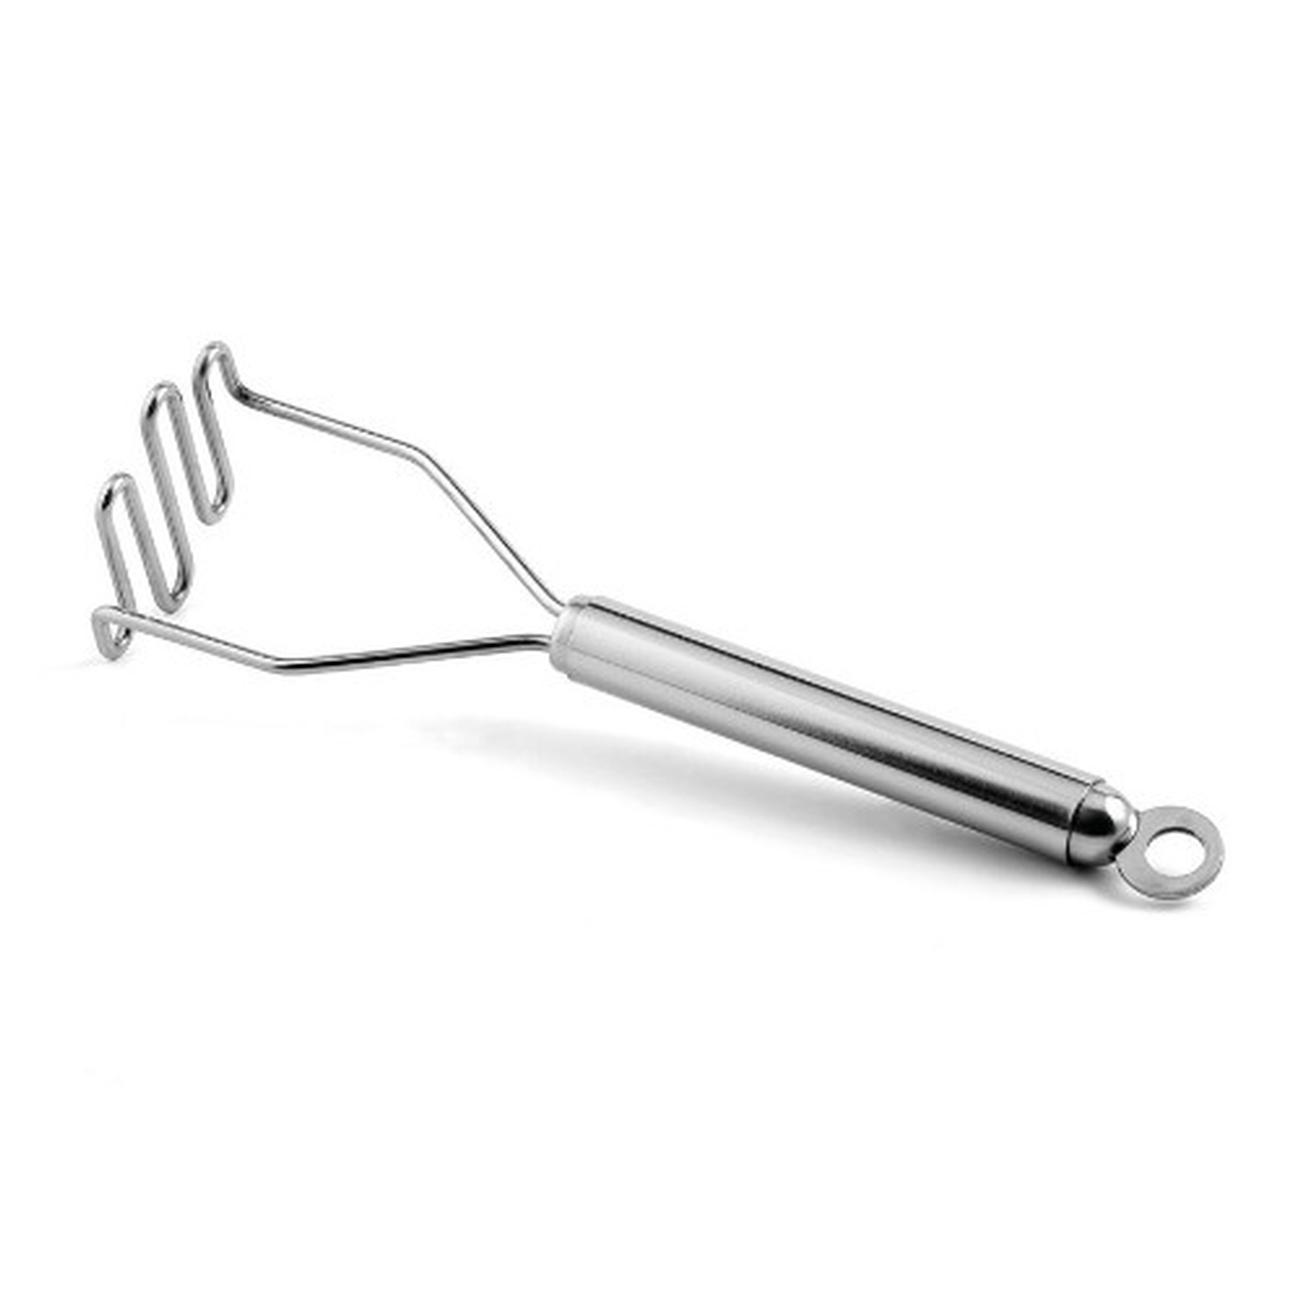 https://www.thekitchenwhisk.ie/contentFiles/productImages/Large/weis-ss-mini-potato-masher.jpg